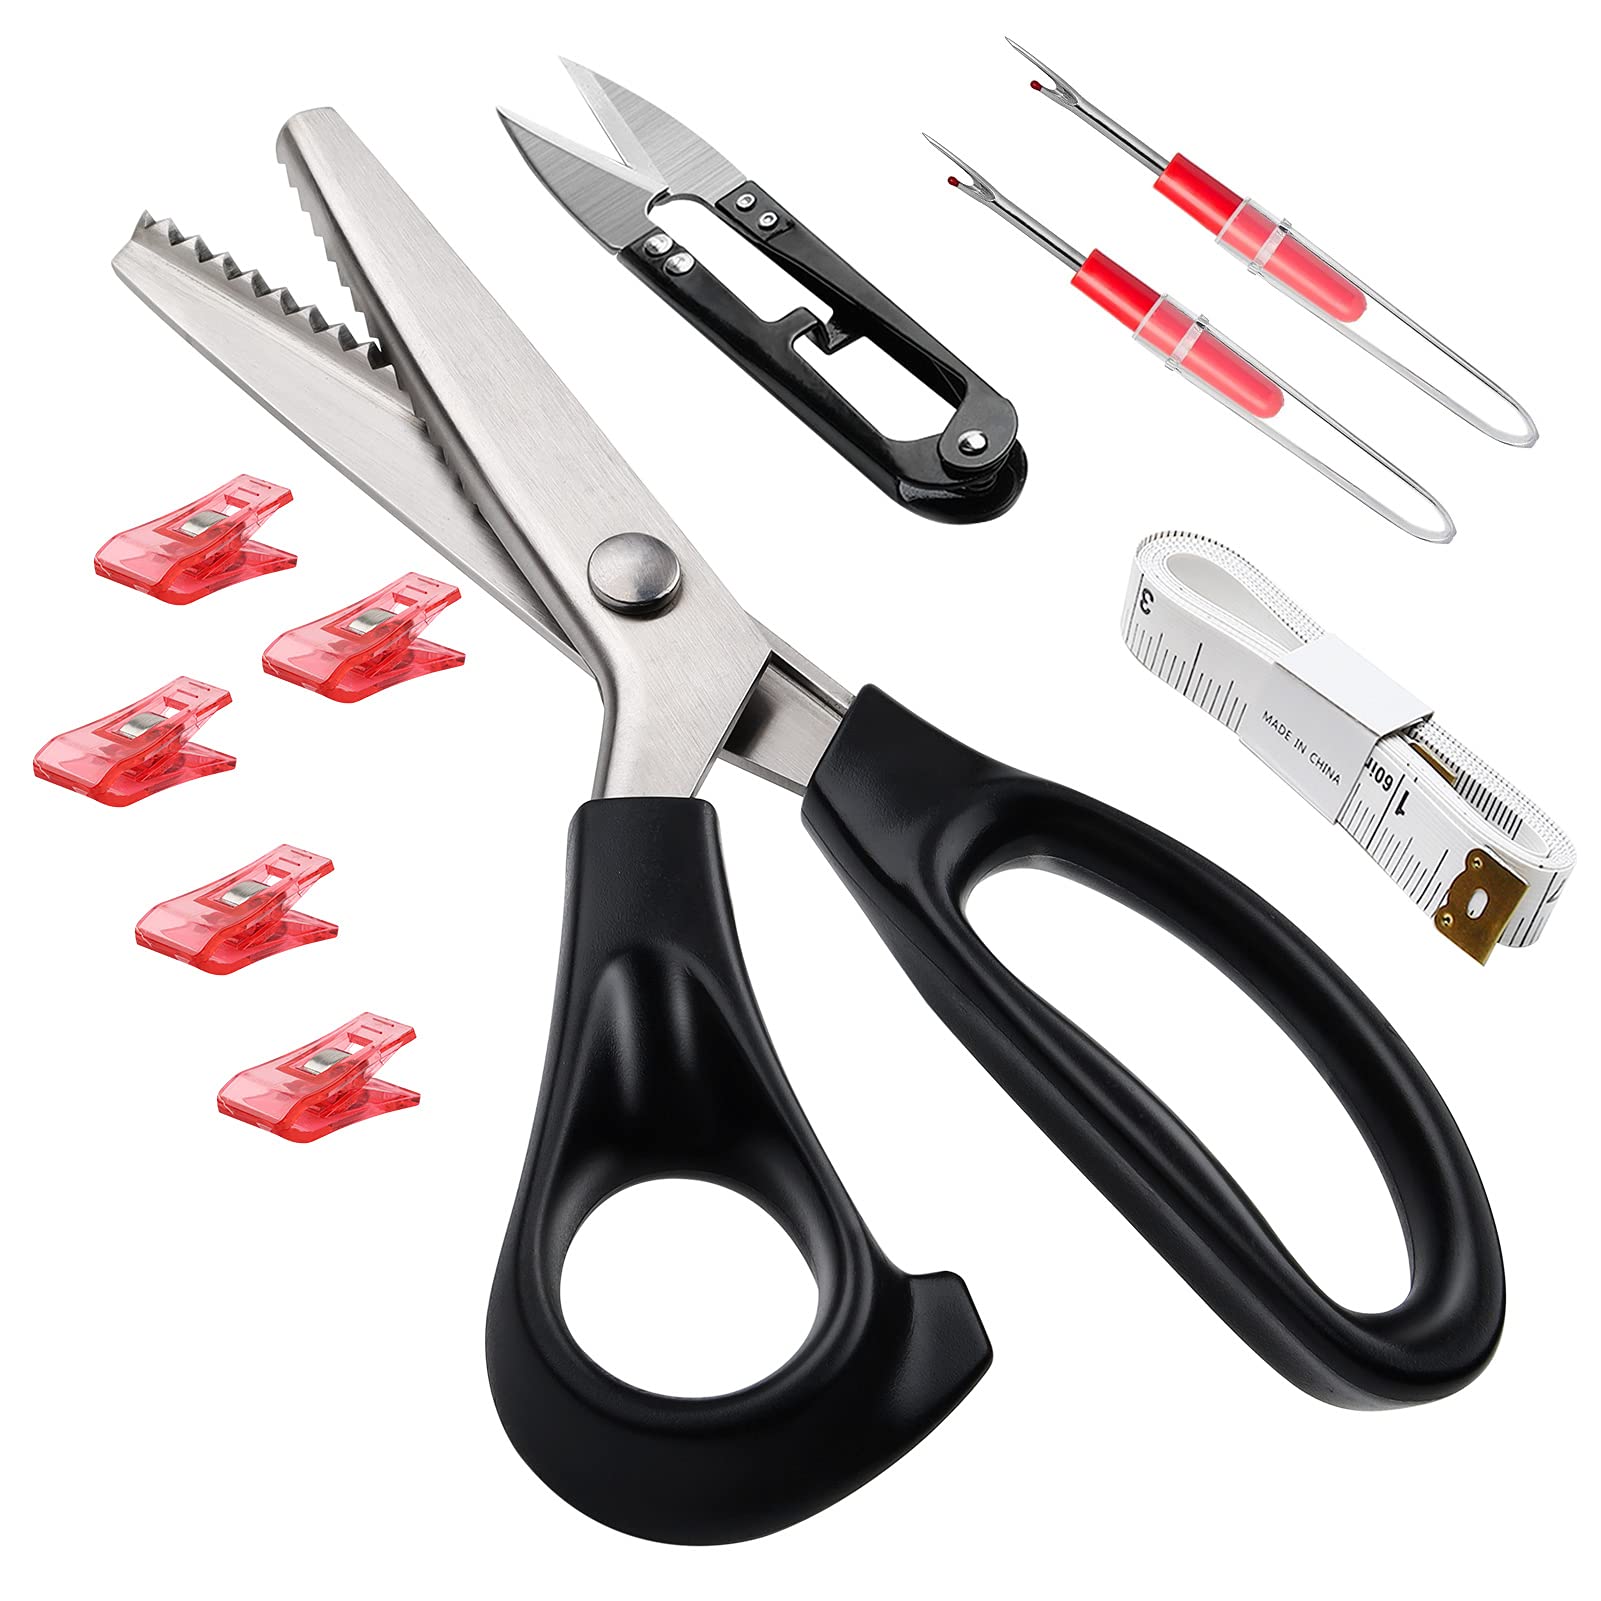 How to Select the Best Scissors and Shears - Threads